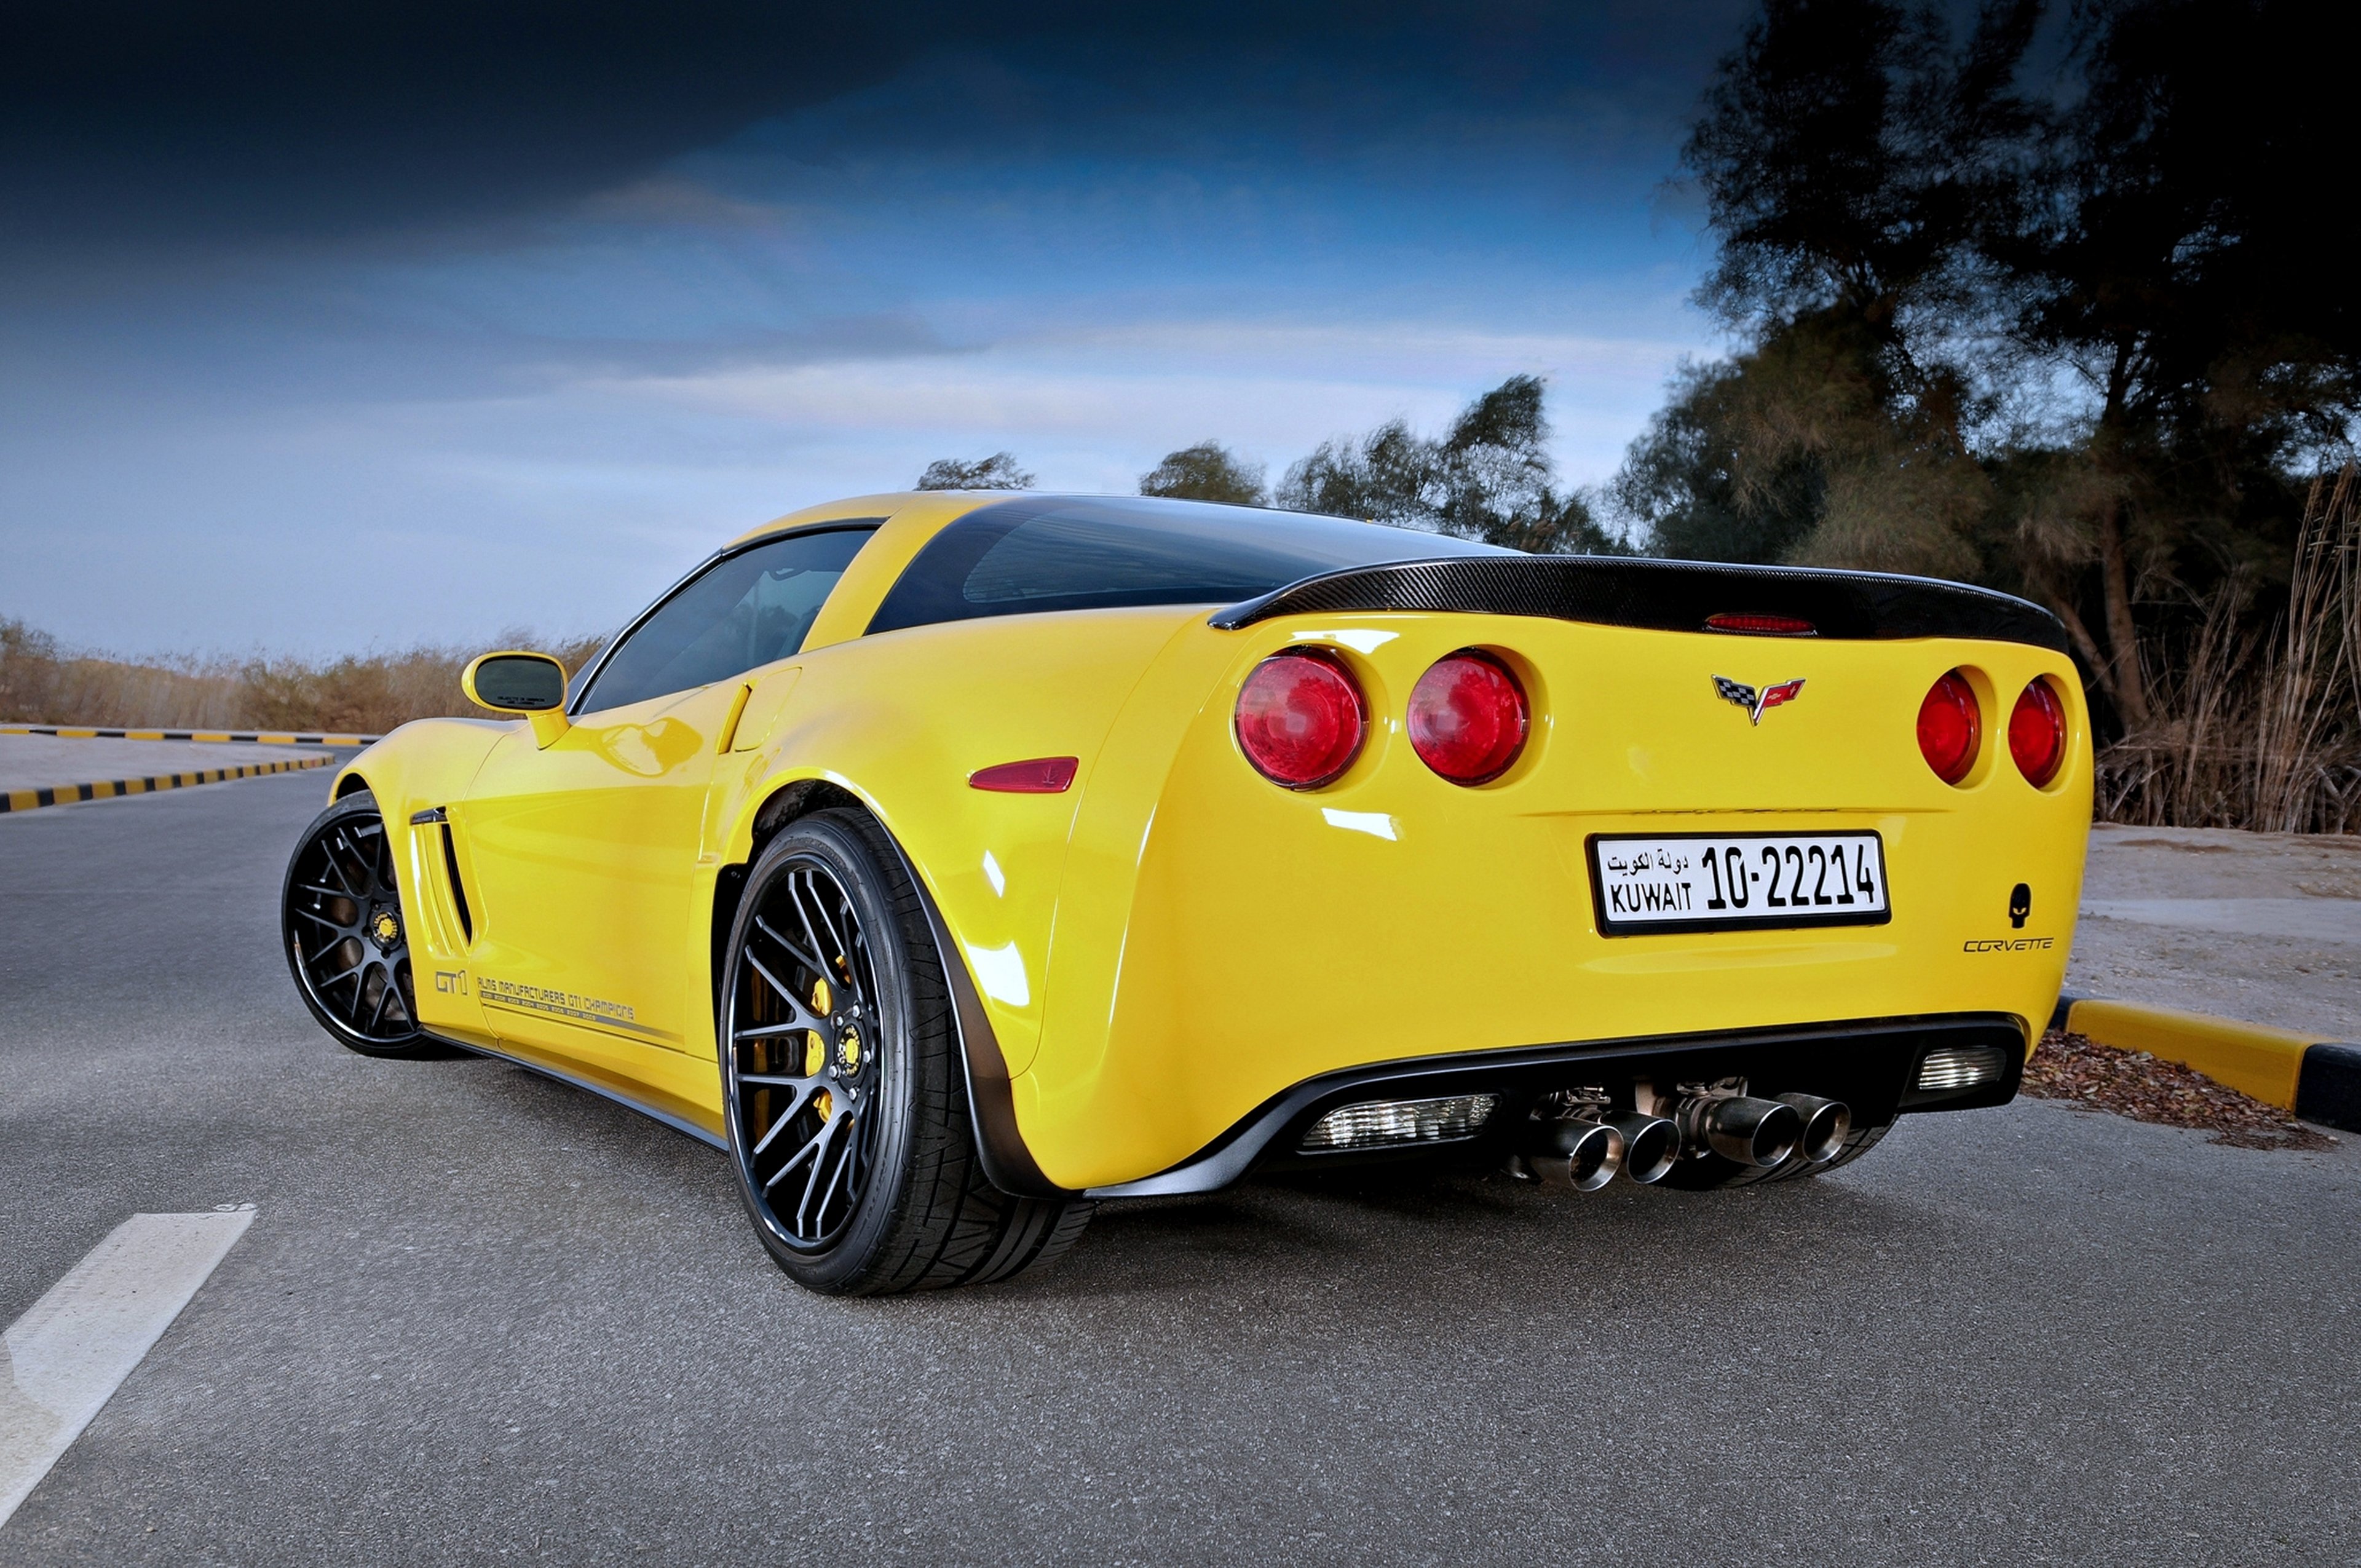 Chevrolet Corvette C6 Grand Sport Yellow Cars Supercars Motors Speed Race Wallpapers Hd Desktop And Mobile Backgrounds